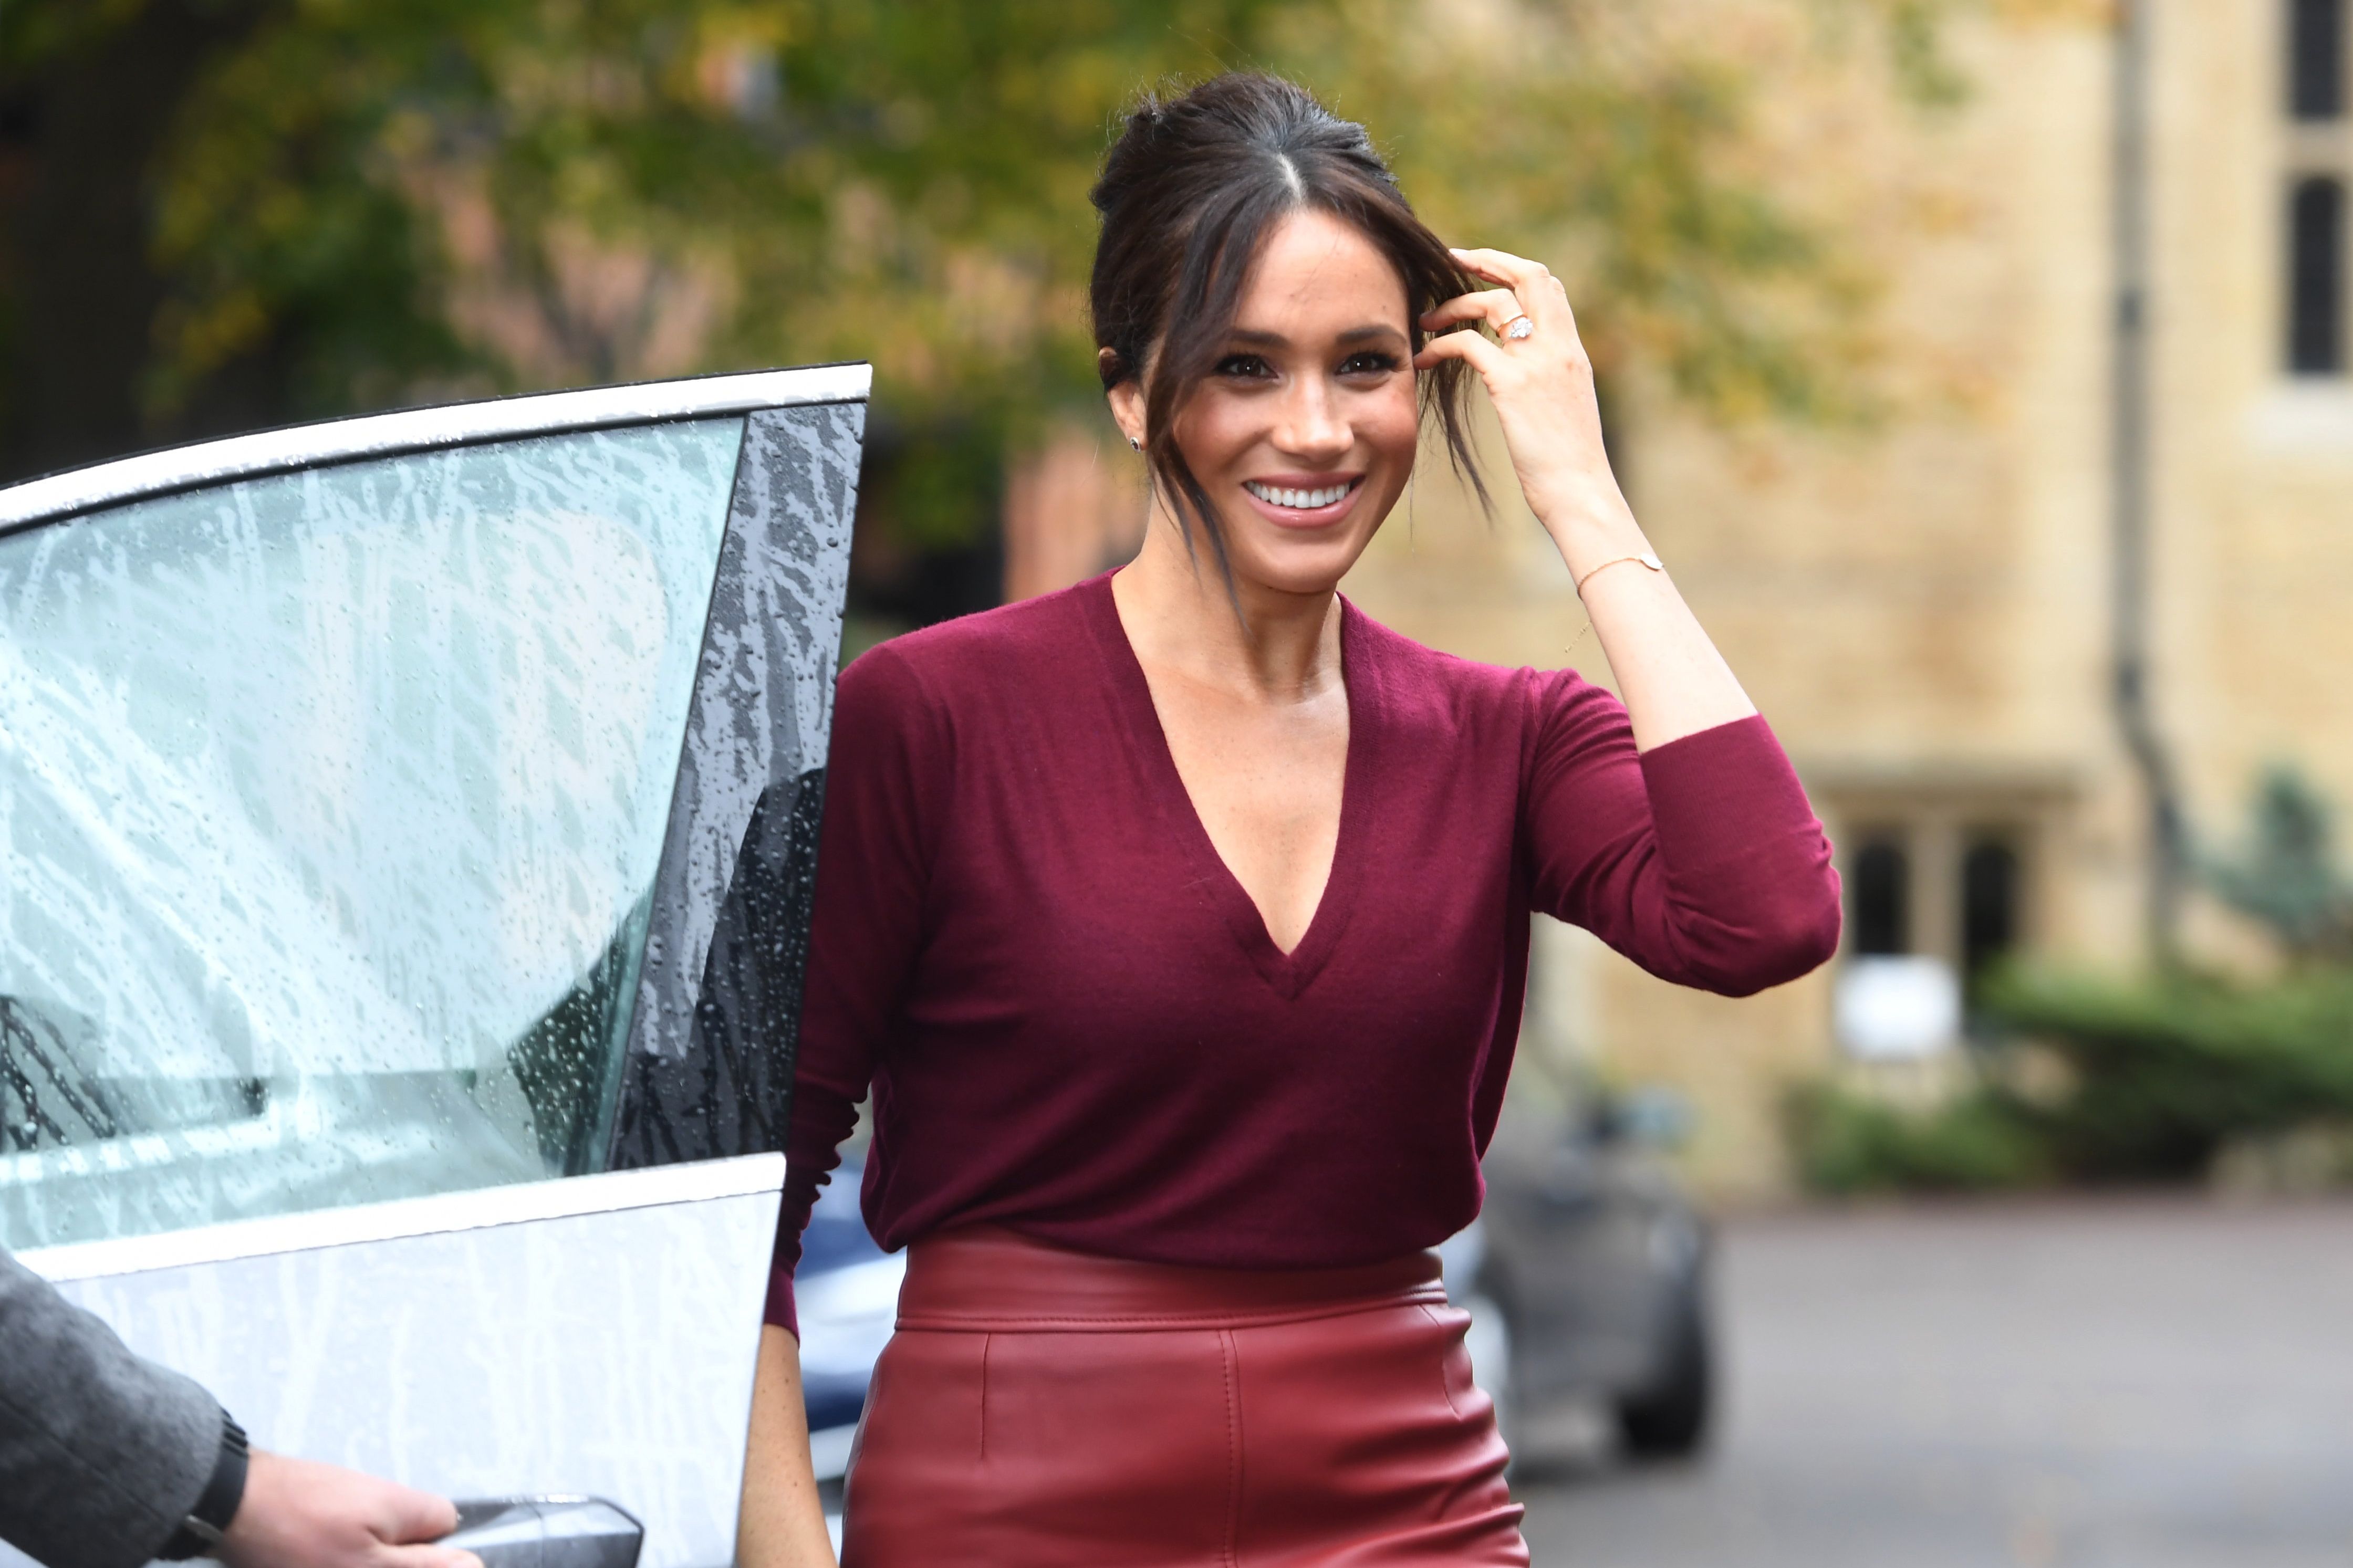 Meghan, Duchess of Sussex attends a roundtable discussion on gender equality with The Queens Commonwealth Trust (QCT) and One Young World at Windsor Castle on October 25, 2019 in Windsor, England | Photo: Getty Images